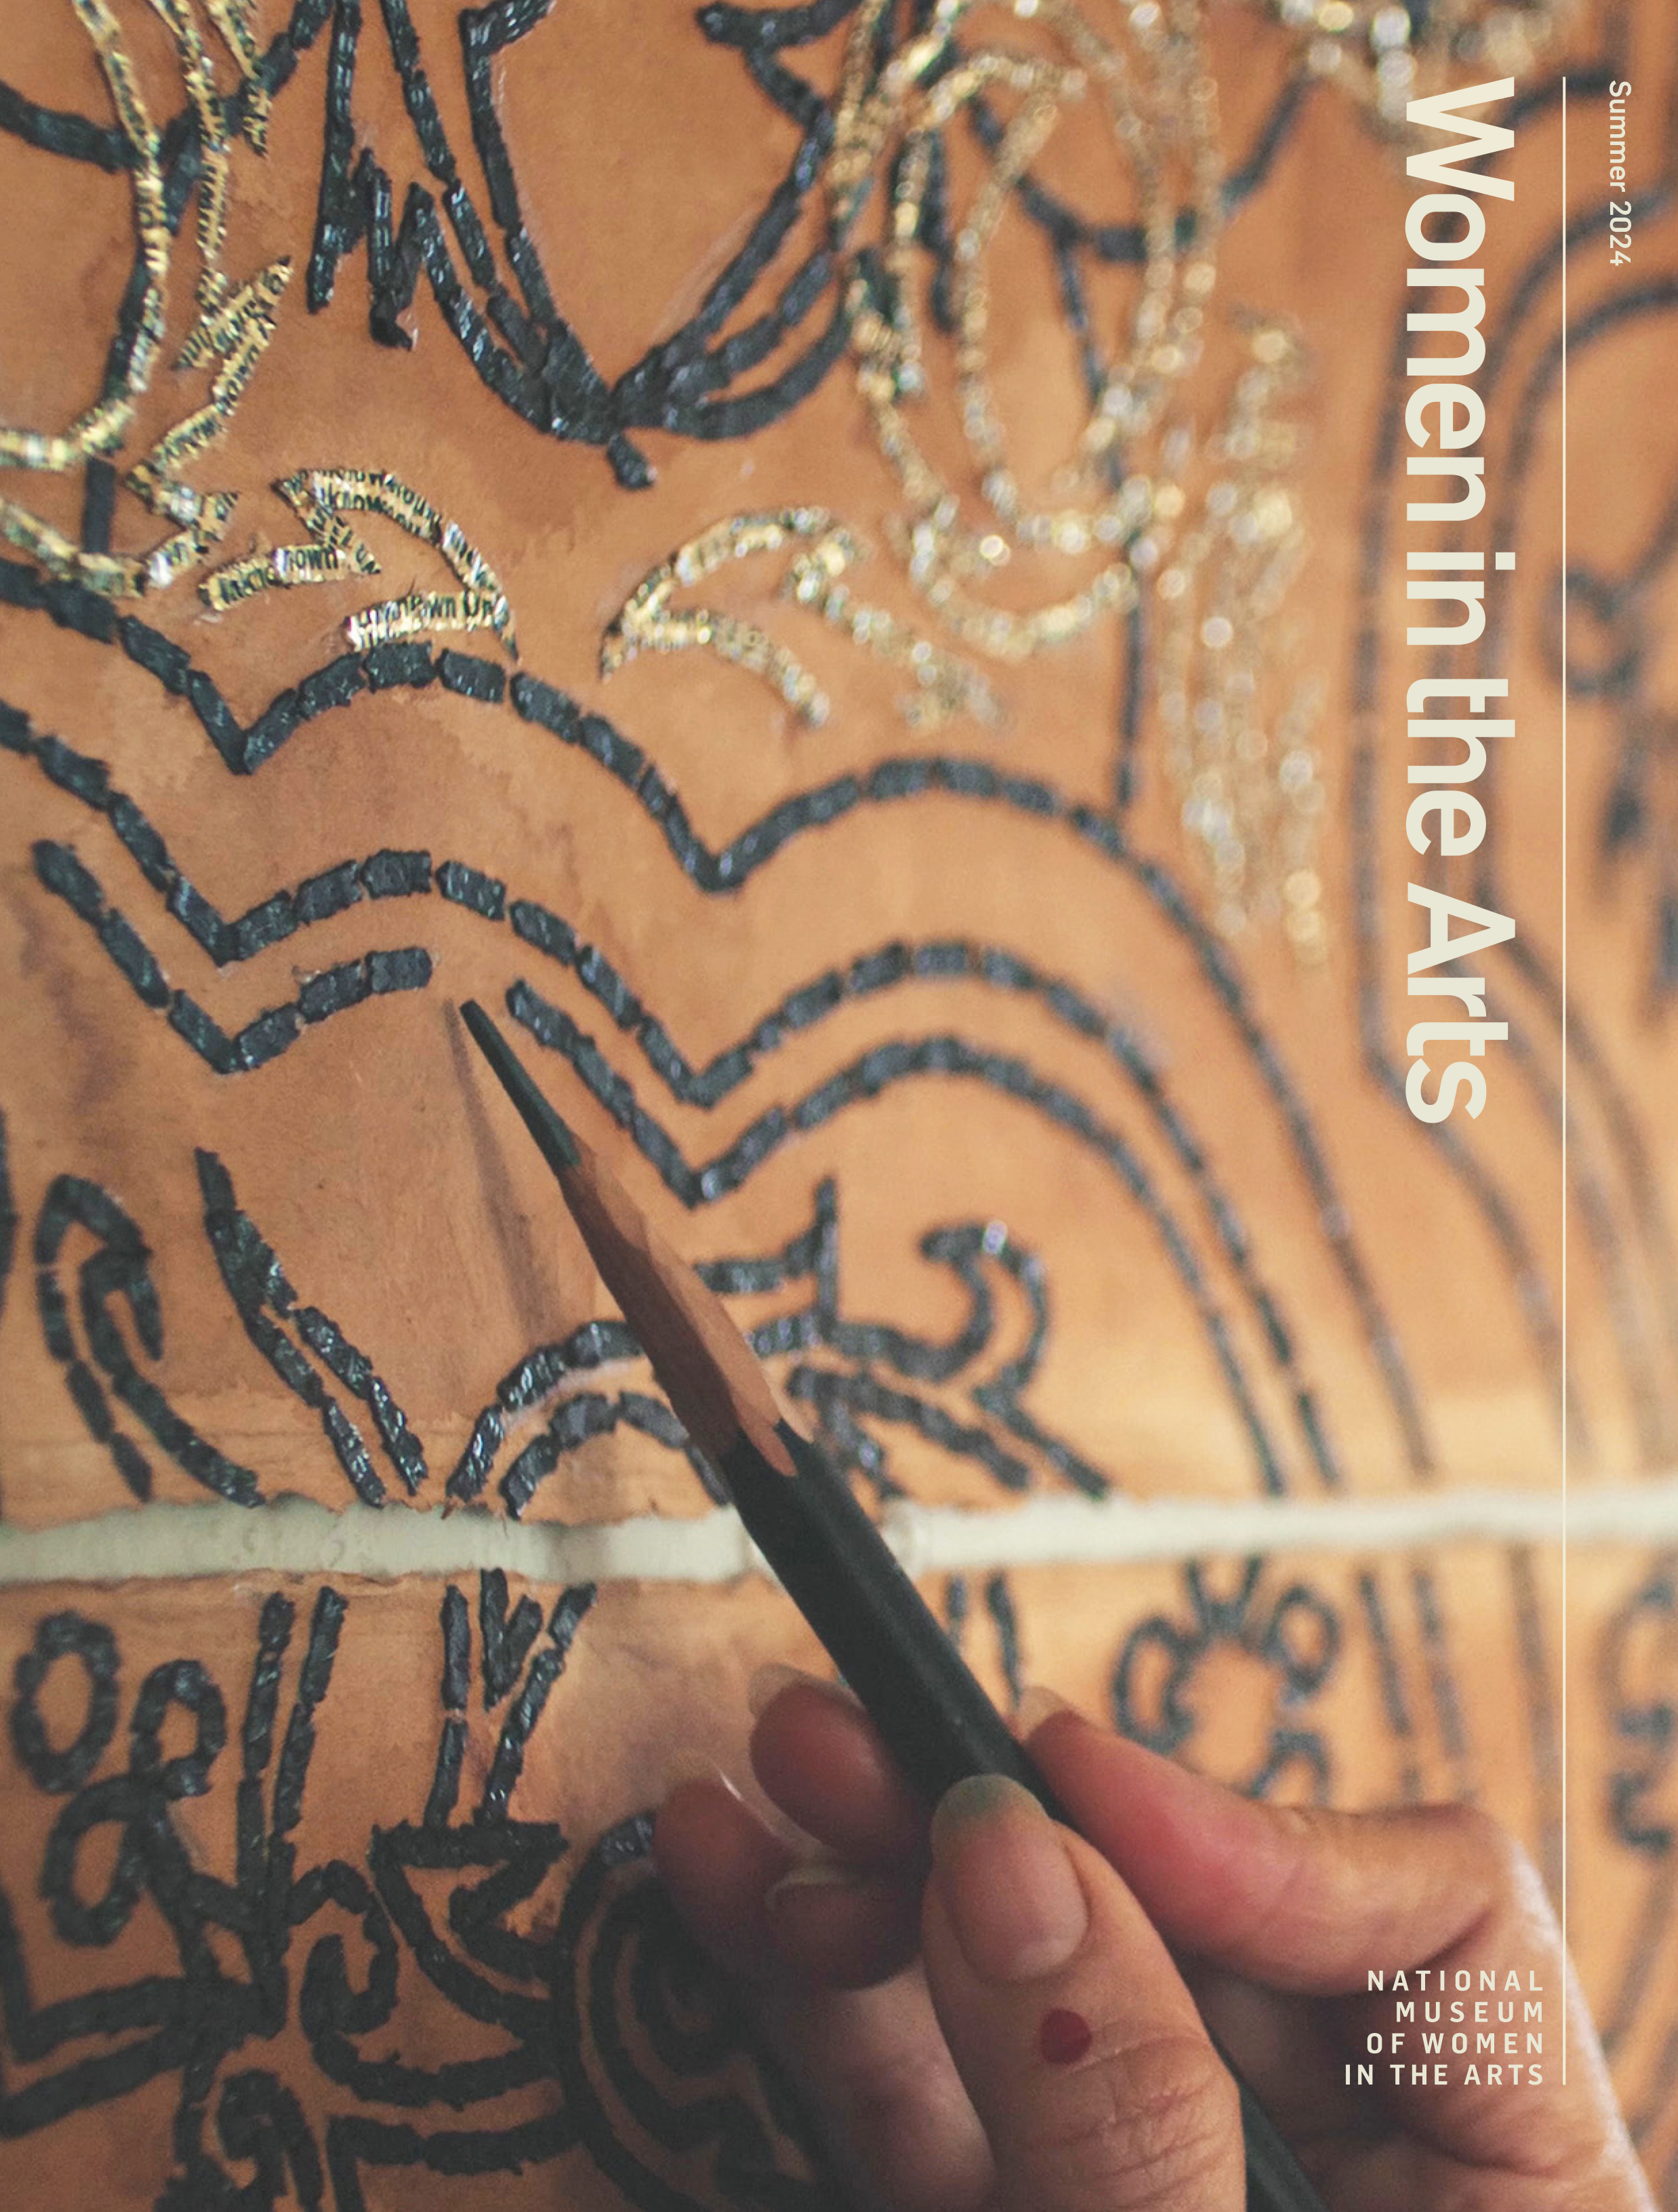 A magazine cover with an image of a hand holding a pencil hovering just above the surface of sepia toned surface with tiny slivers of paper arranged in an organic pattern.